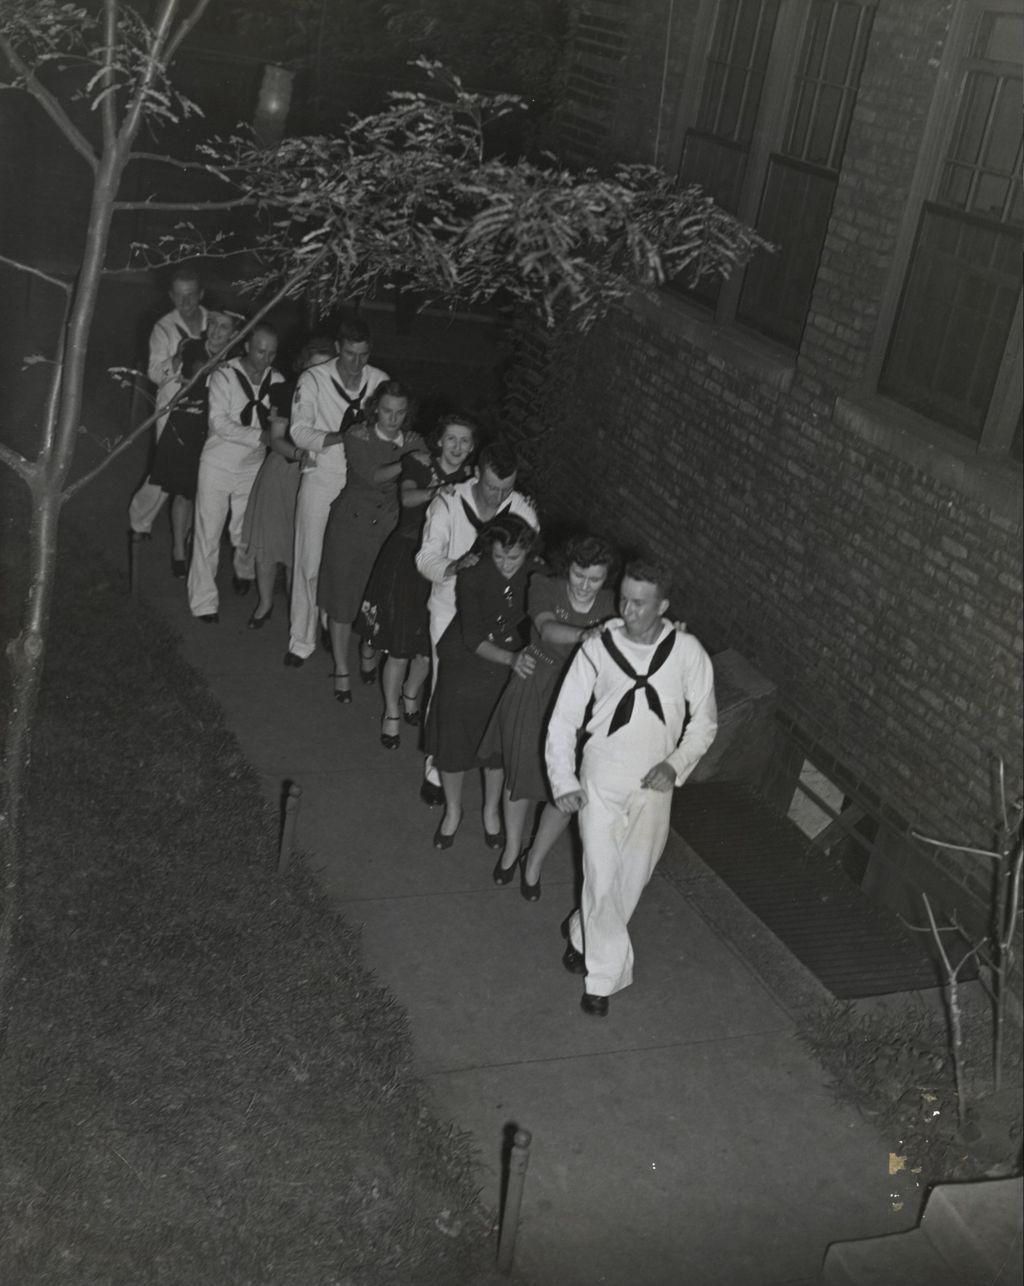 United States Navy sailors in a conga line with several women in the Hull-House Courtyard during an "Entertaining the Navy" event